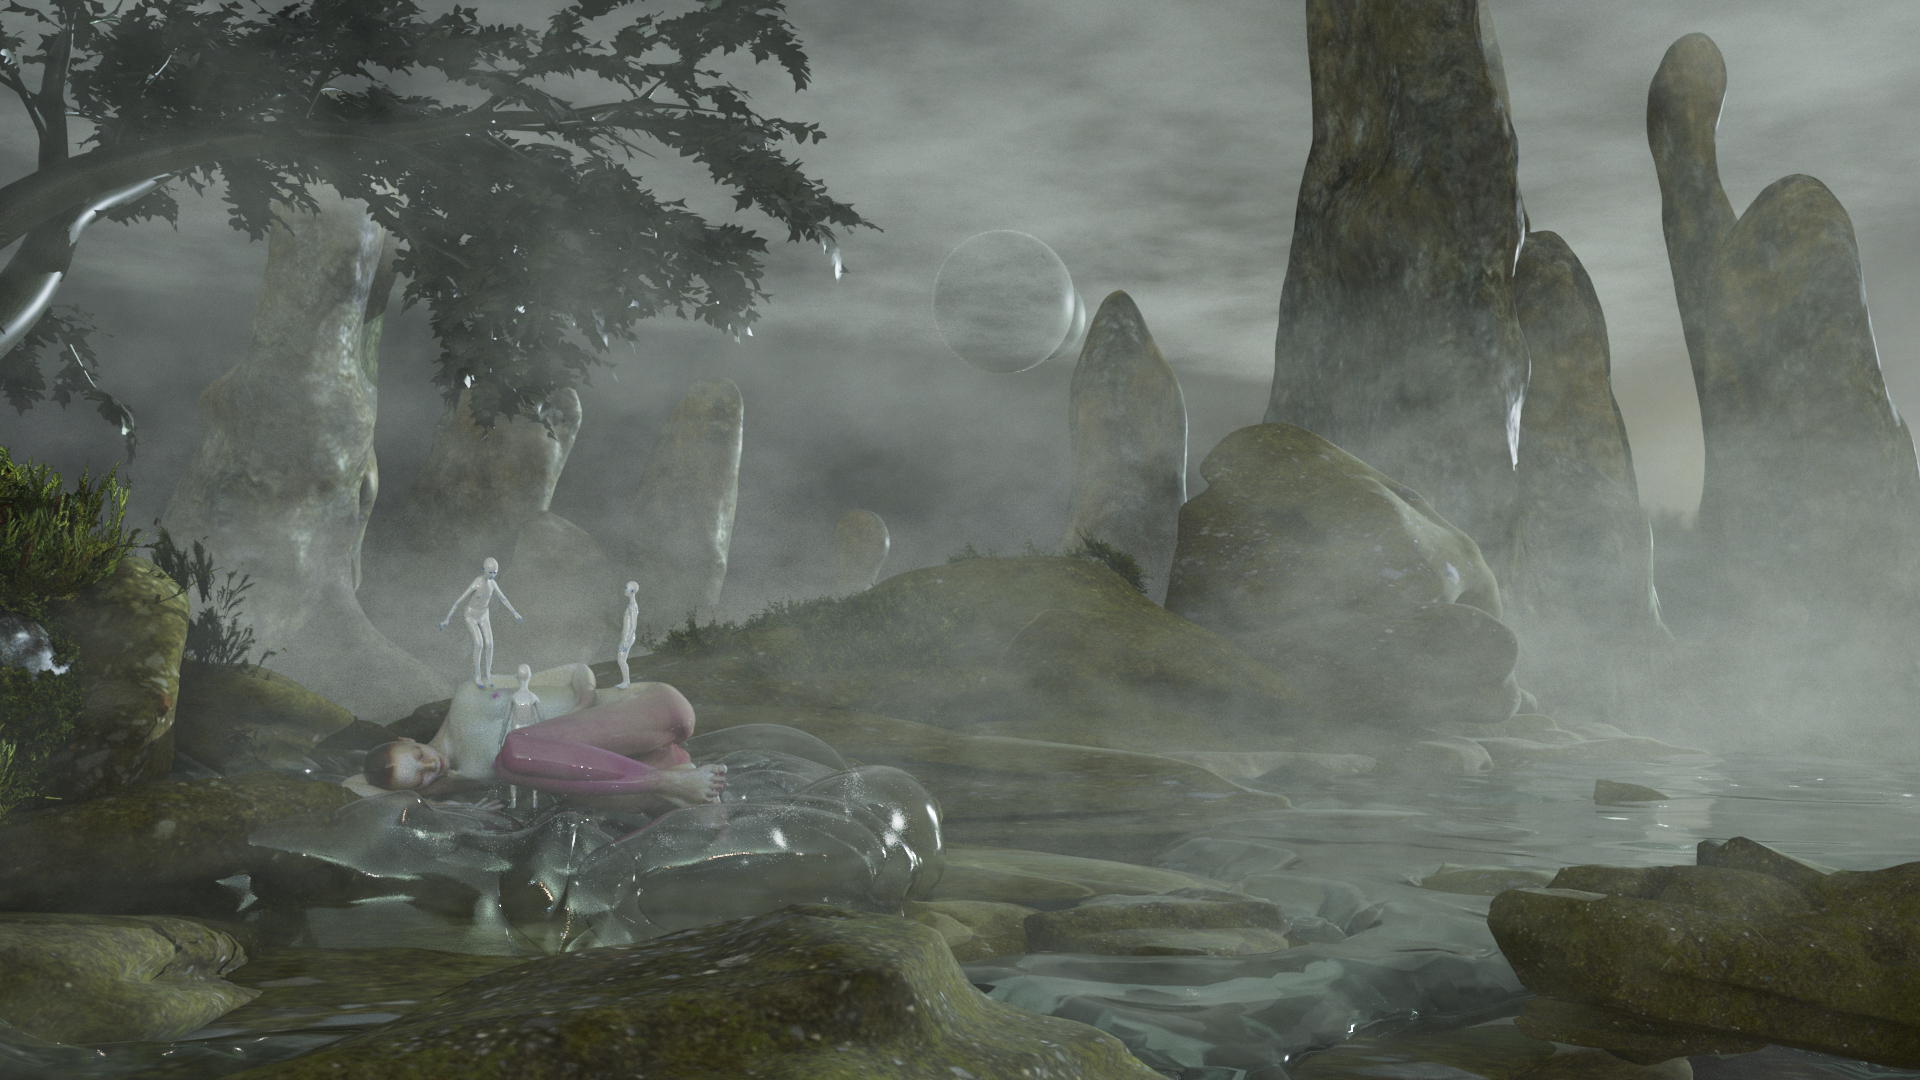 3d render of an outdoor scene, with greenery, fog, a figure lying down, several miniature figures, and a moon or planet in the background